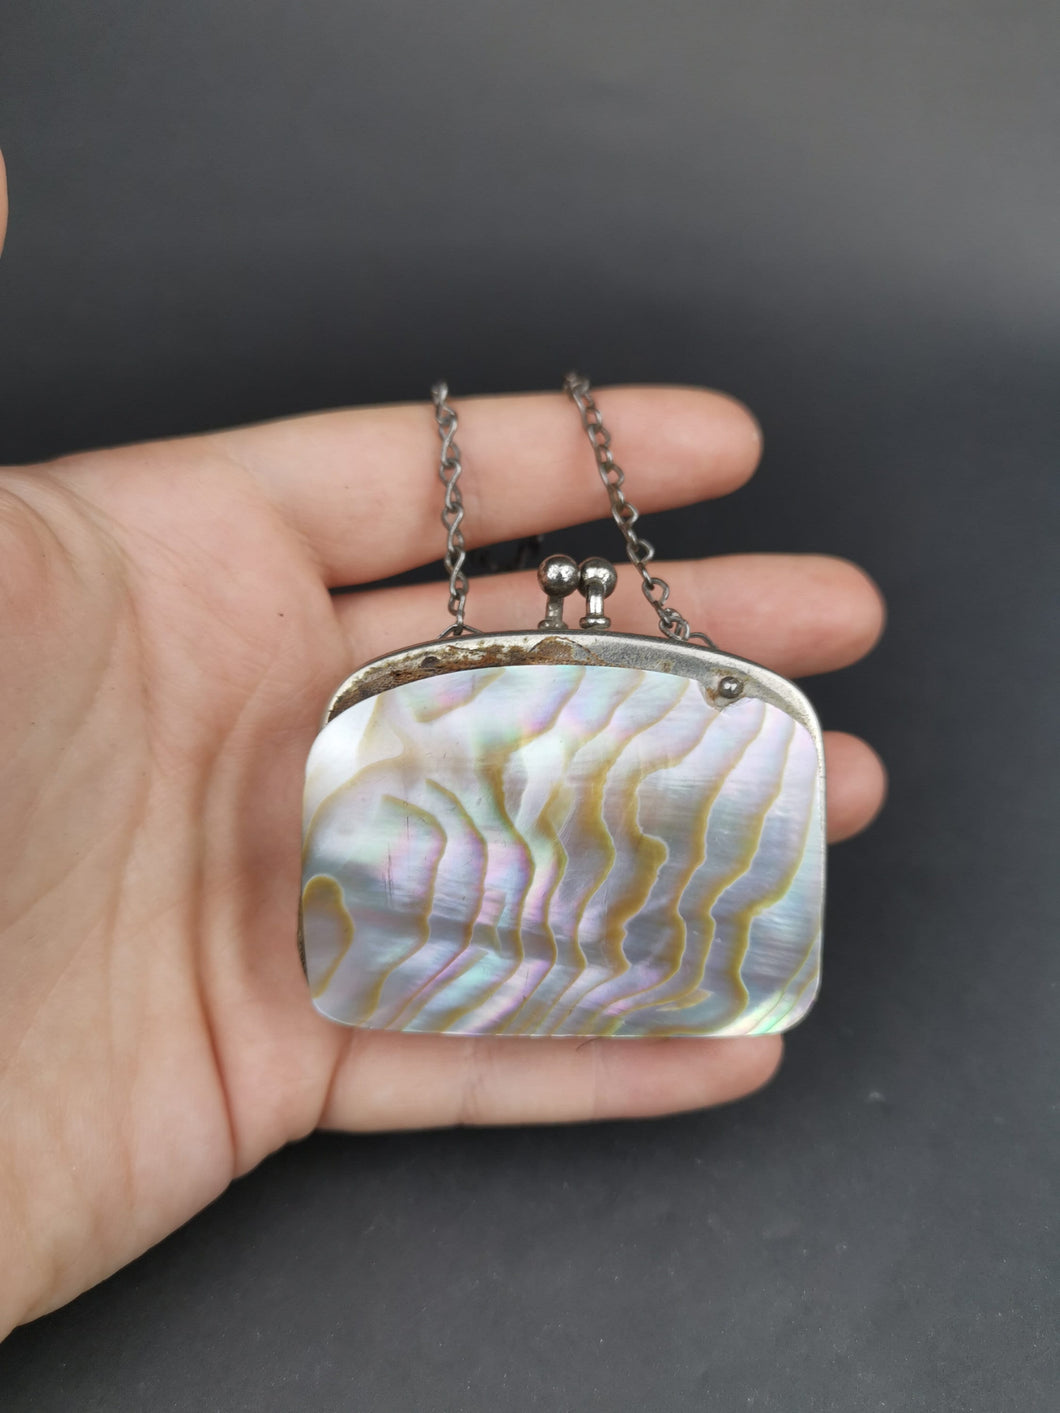 Antique Mother of Pearl Shell Sovereign Coin Purse with Chain Link Top Handle Victorian Original 1800's